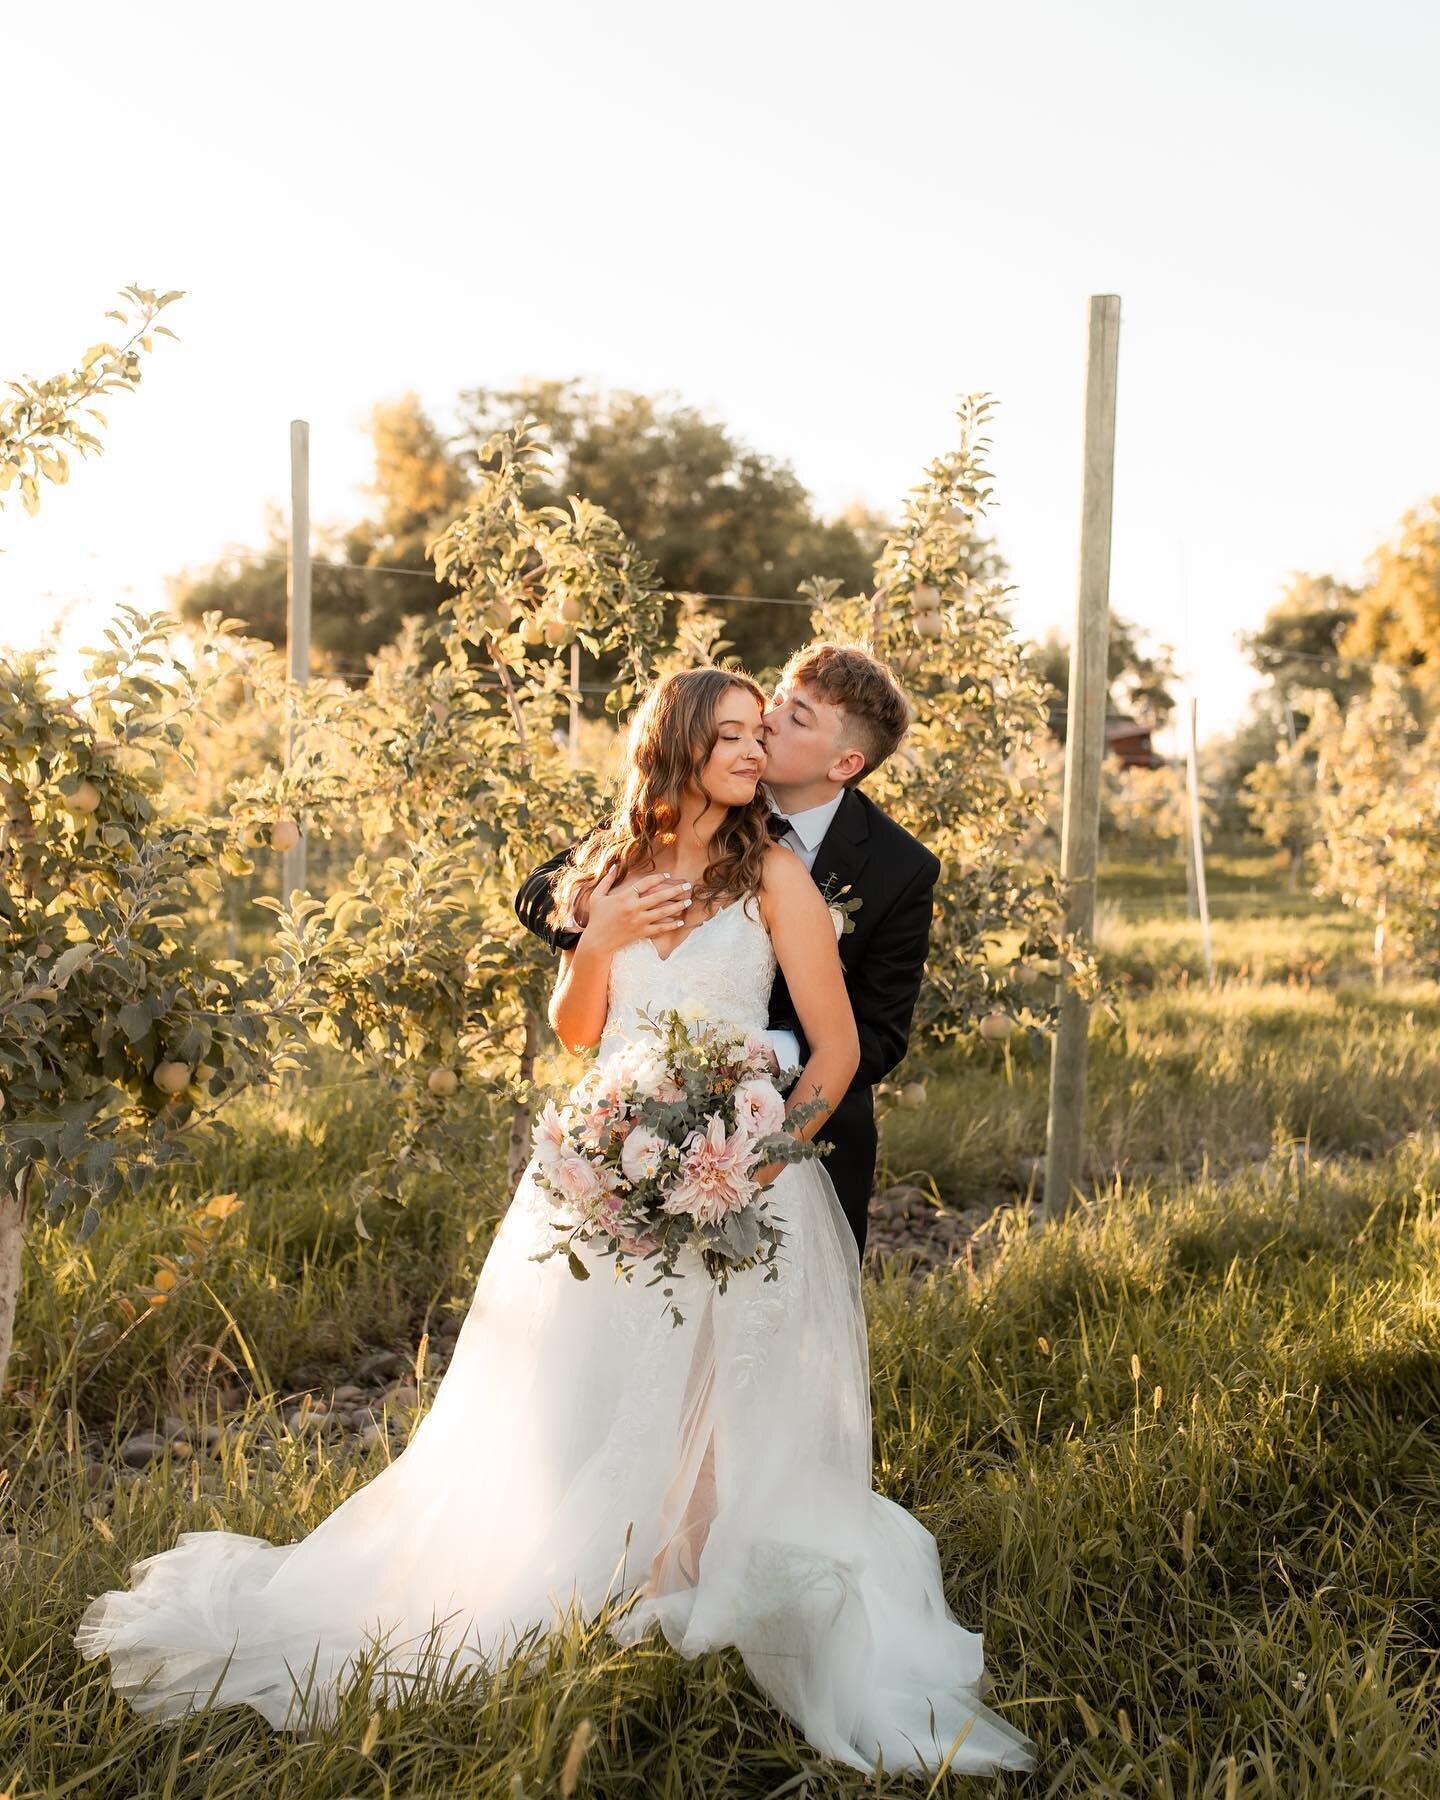 Intimate weddings are always so fun to be a part of. There is so much more time for the couple to just be with each other and their loved ones. Here&rsquo;s a few more from this beautiful day with Rhett + Jolie. ✨